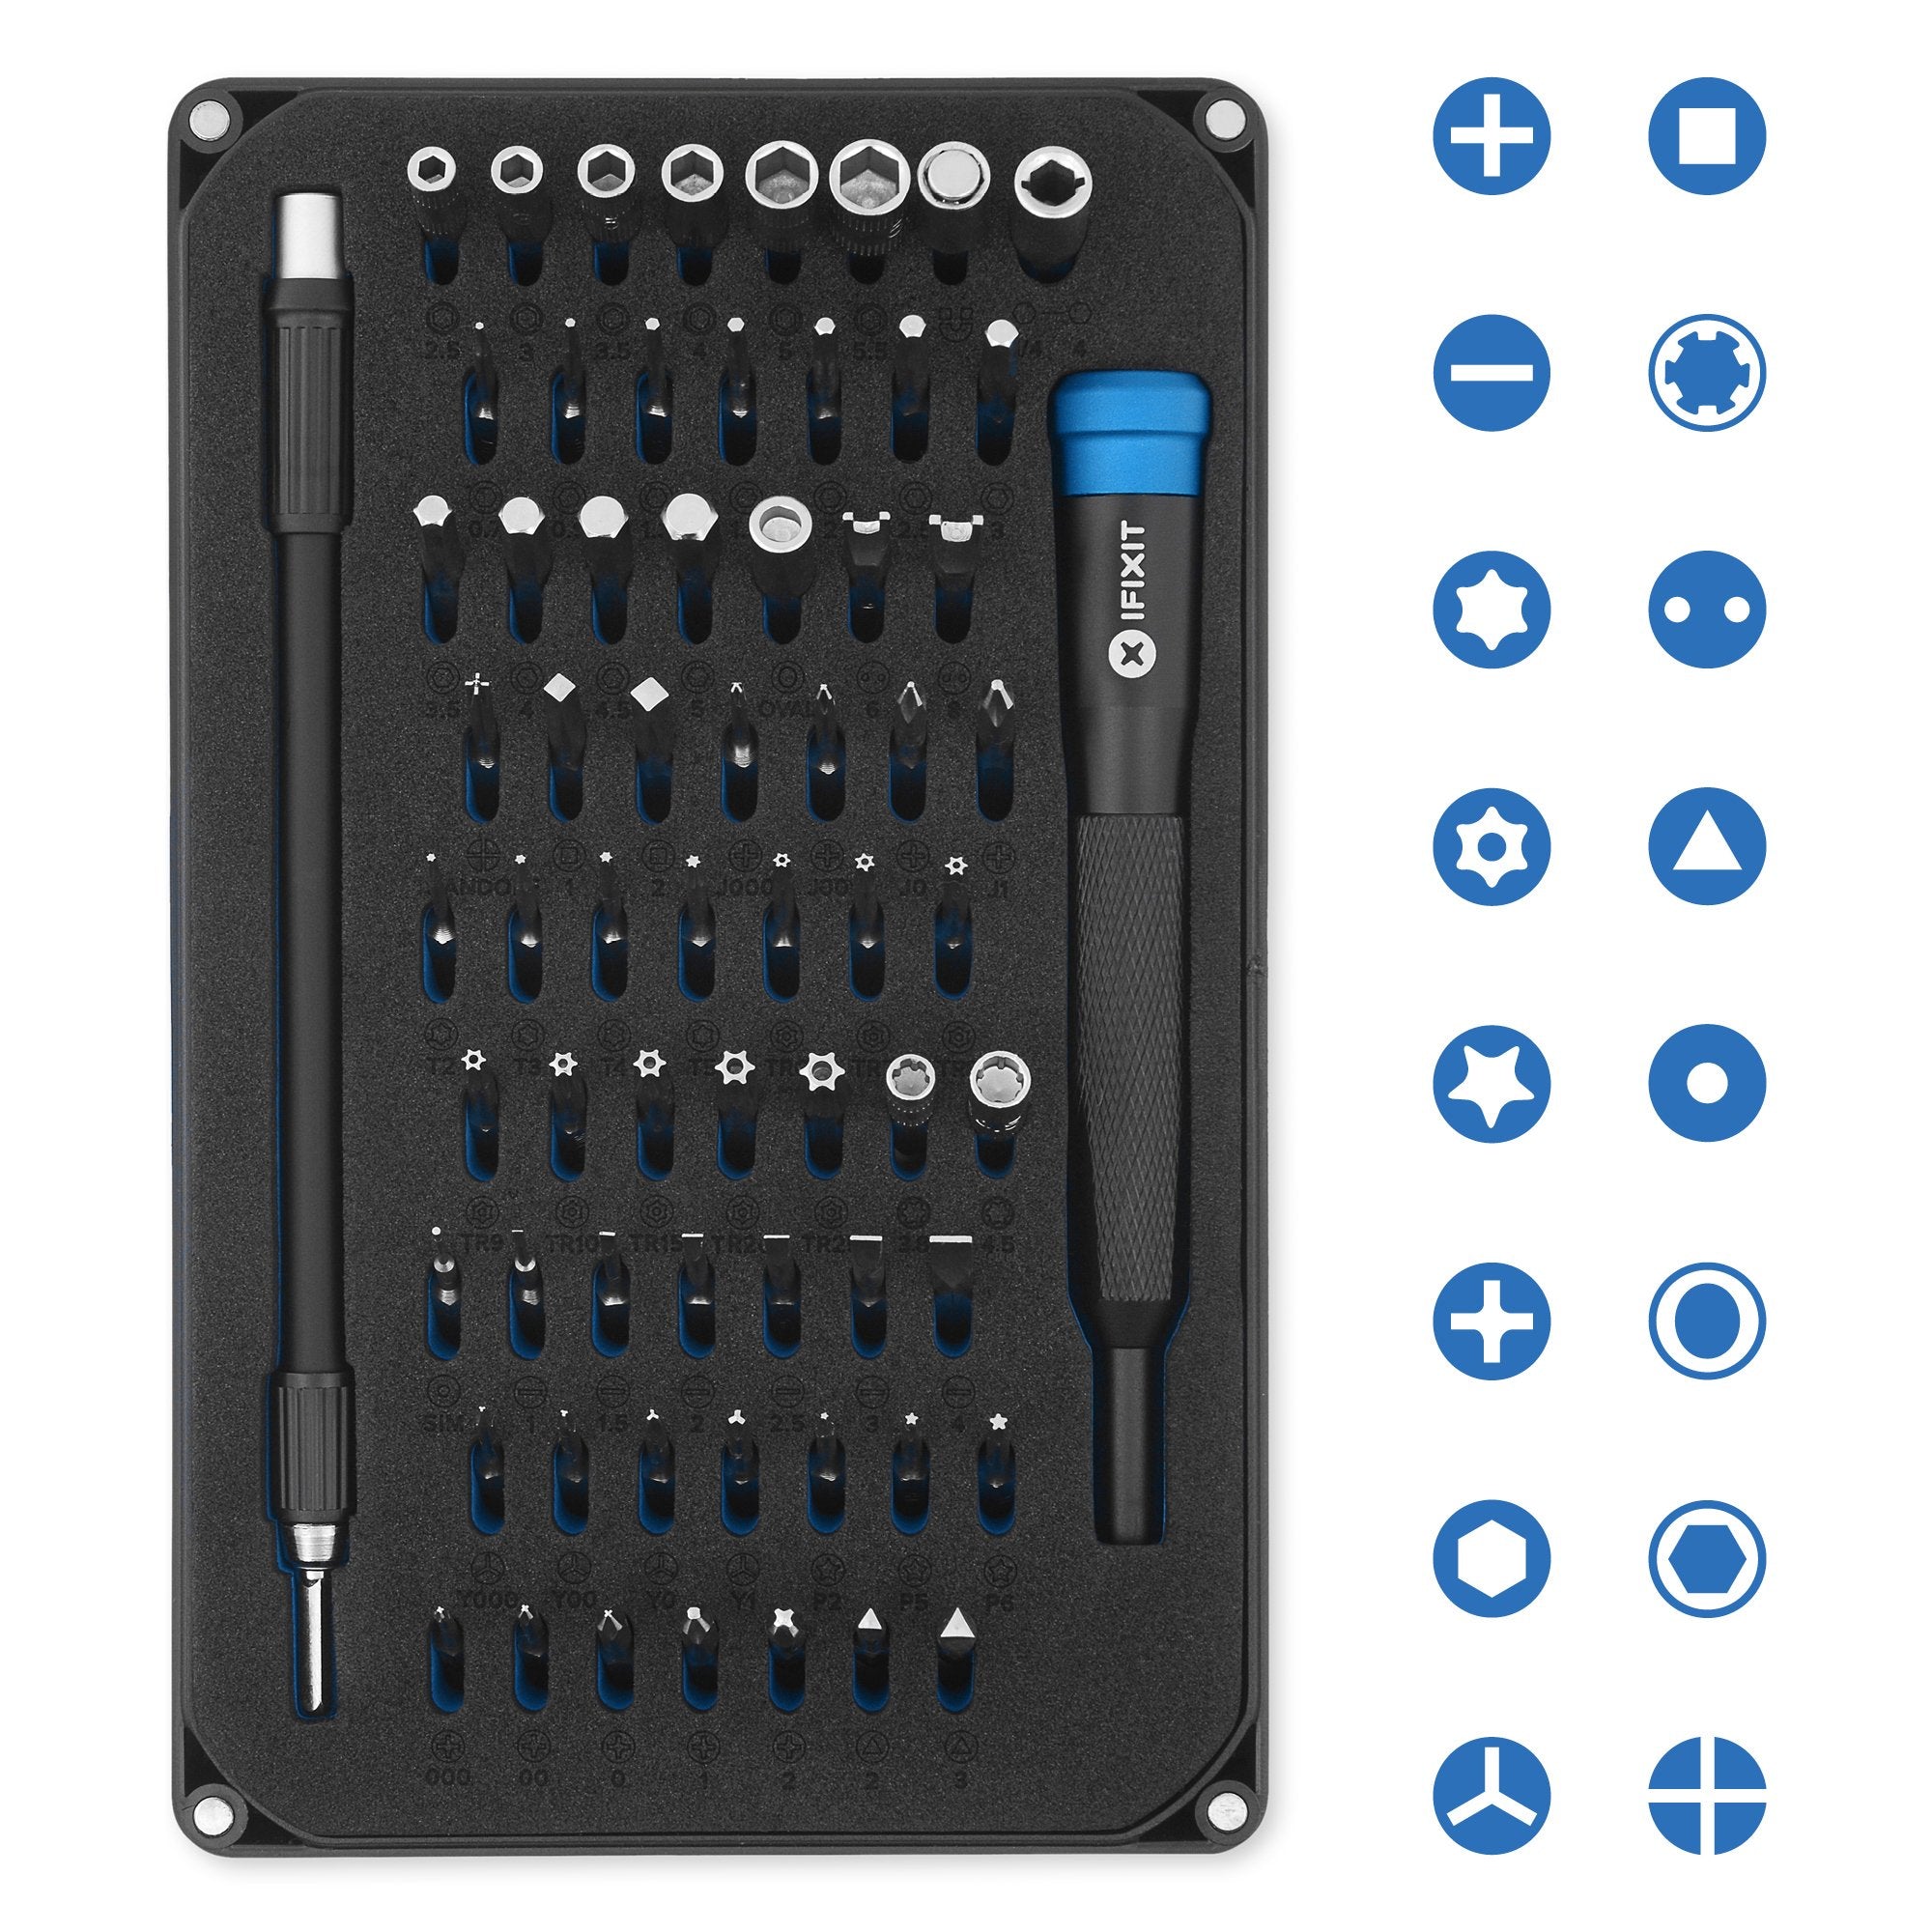 This kit is almost identical to the iFixit kit. But theirs cost 74.99  instead of 39.99. : r/harborfreight